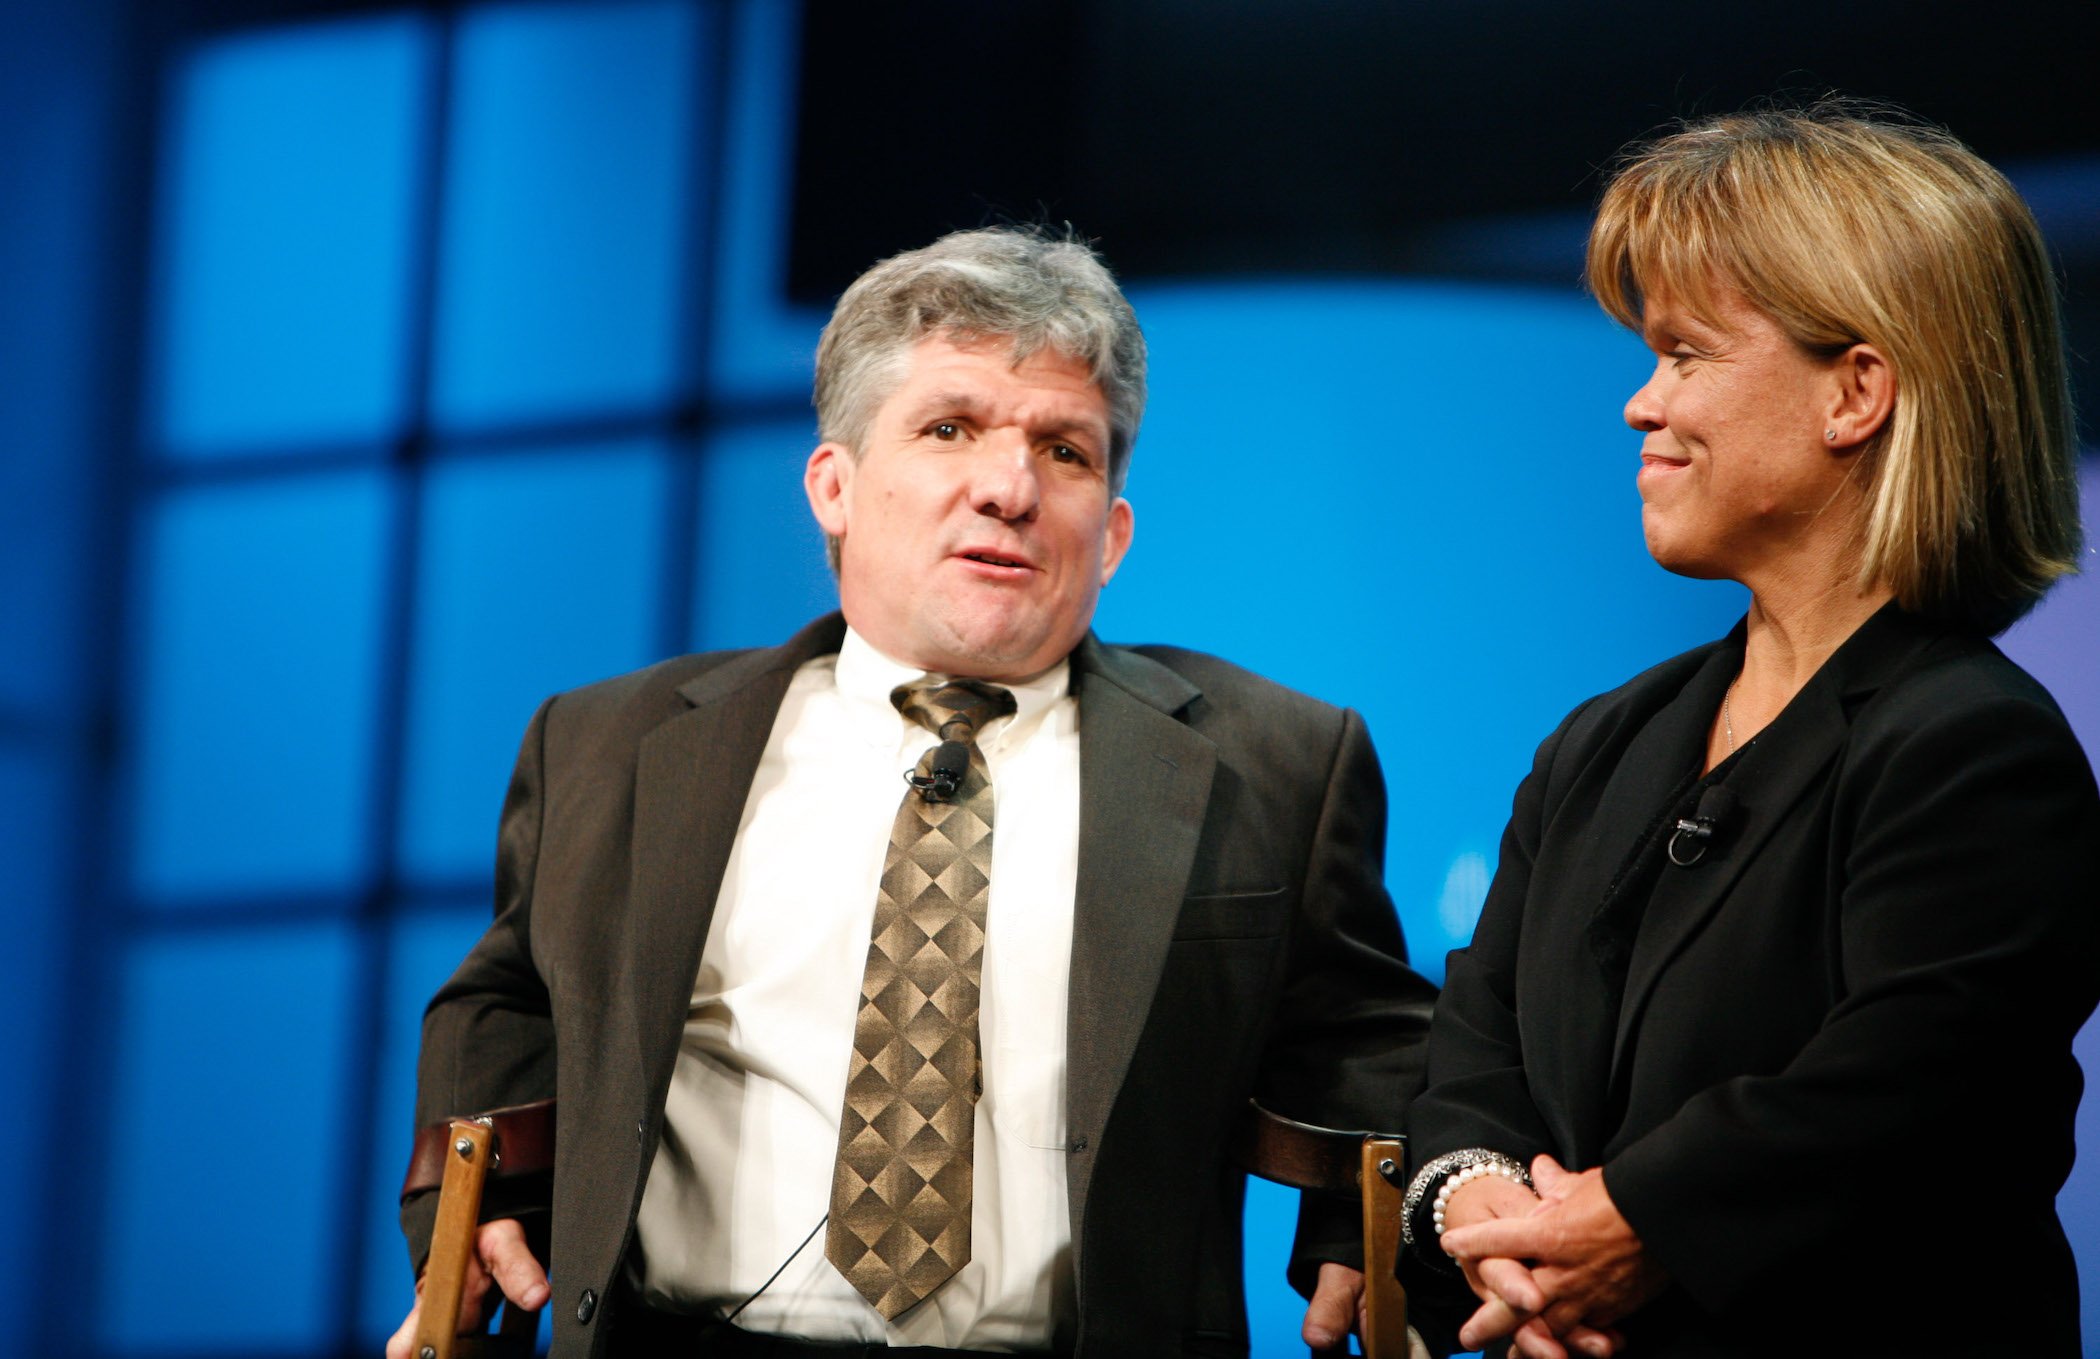 Matt Roloff and Amy Roloff from 'Little People, Big World.' Matt and Amy also brought their kids, Zach, Jeremy, Molly, and Jacob Roloff, on the show